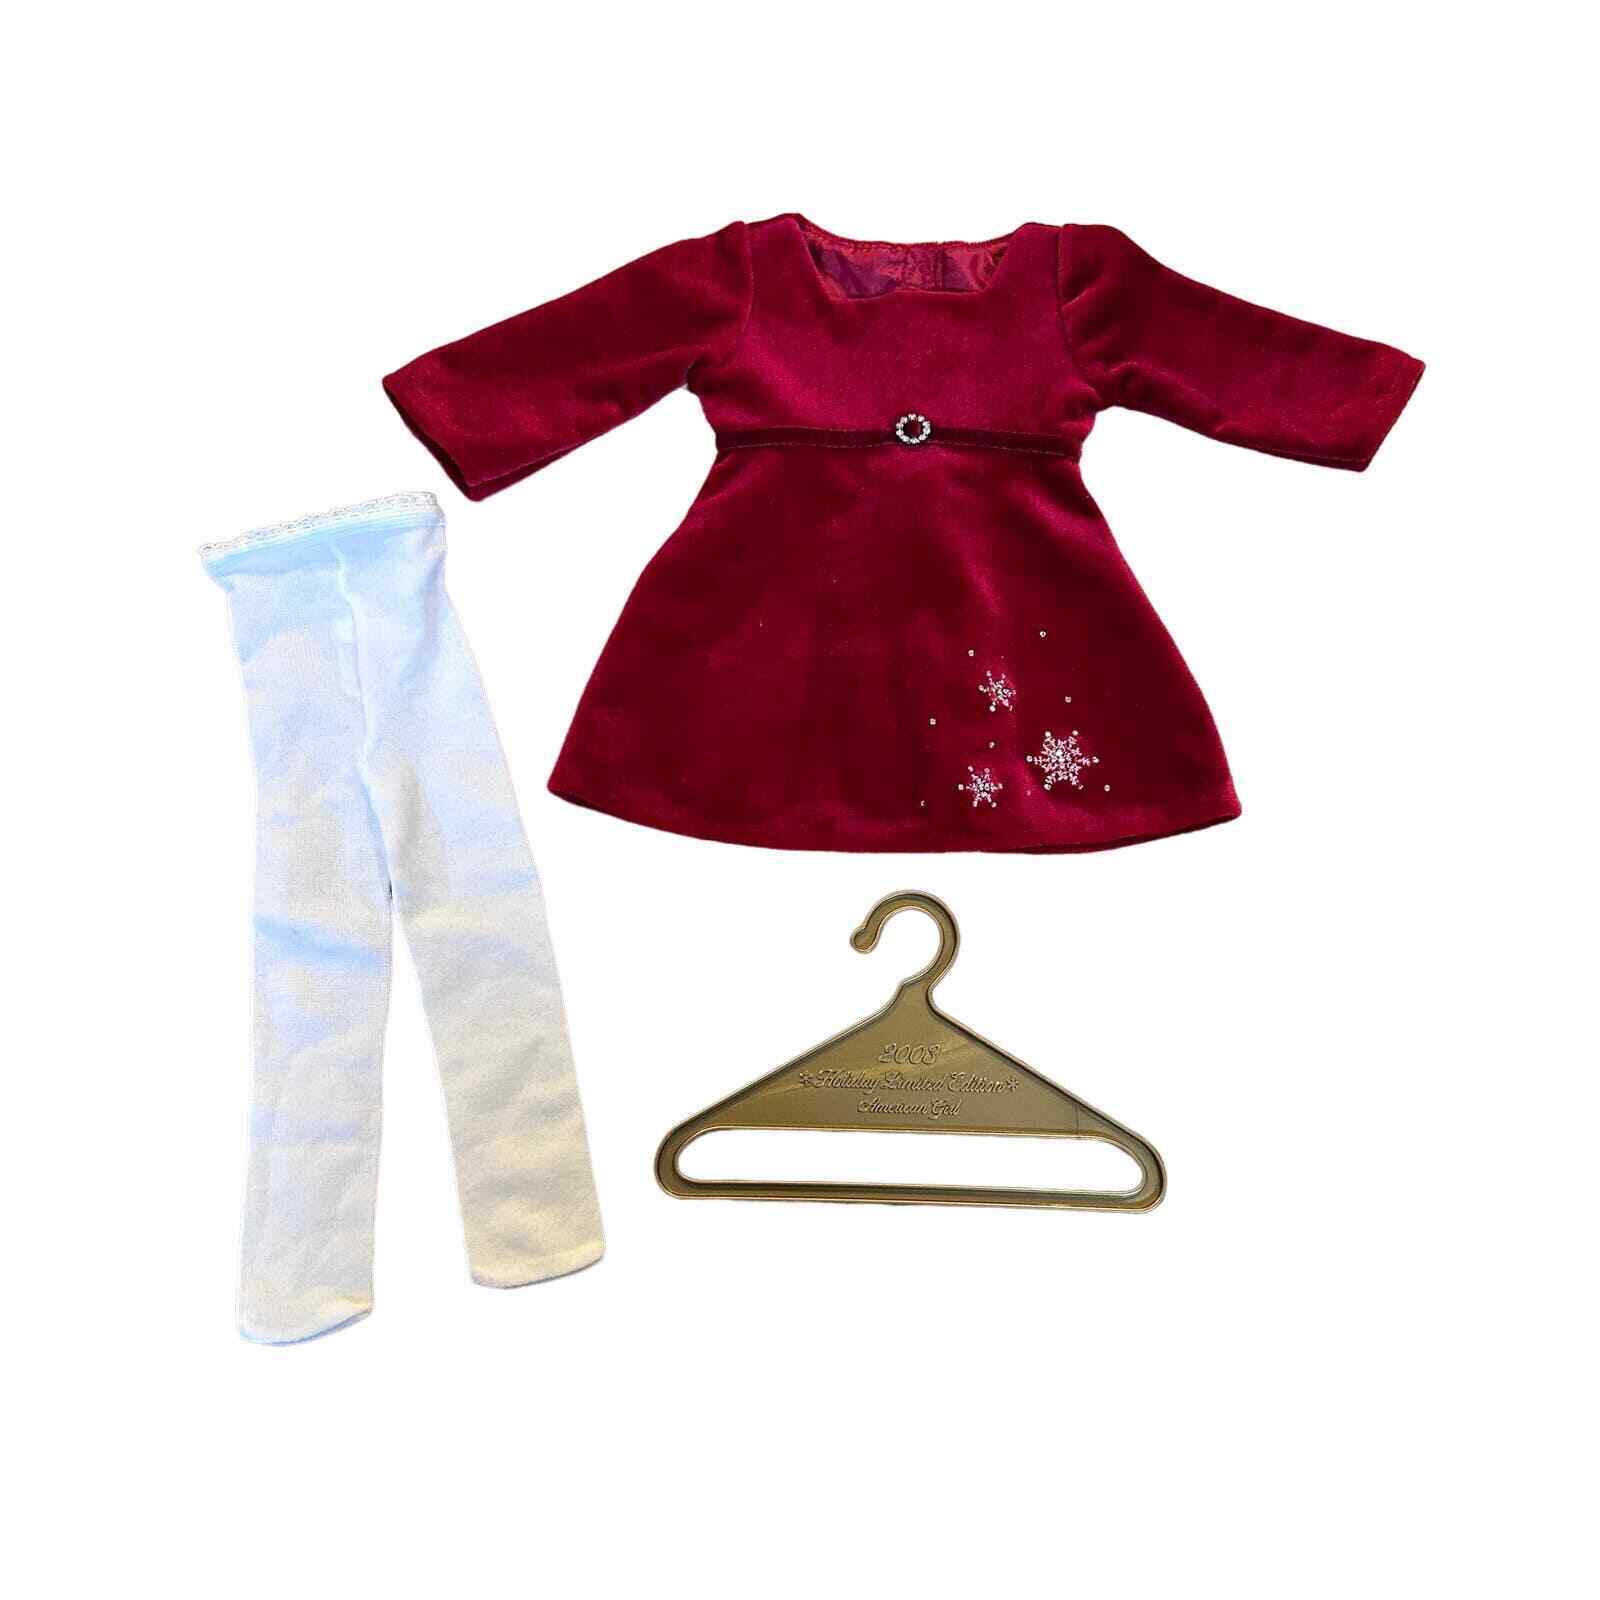 American Girl 2003 Retired Radiant Rhinestone Outfit for doll